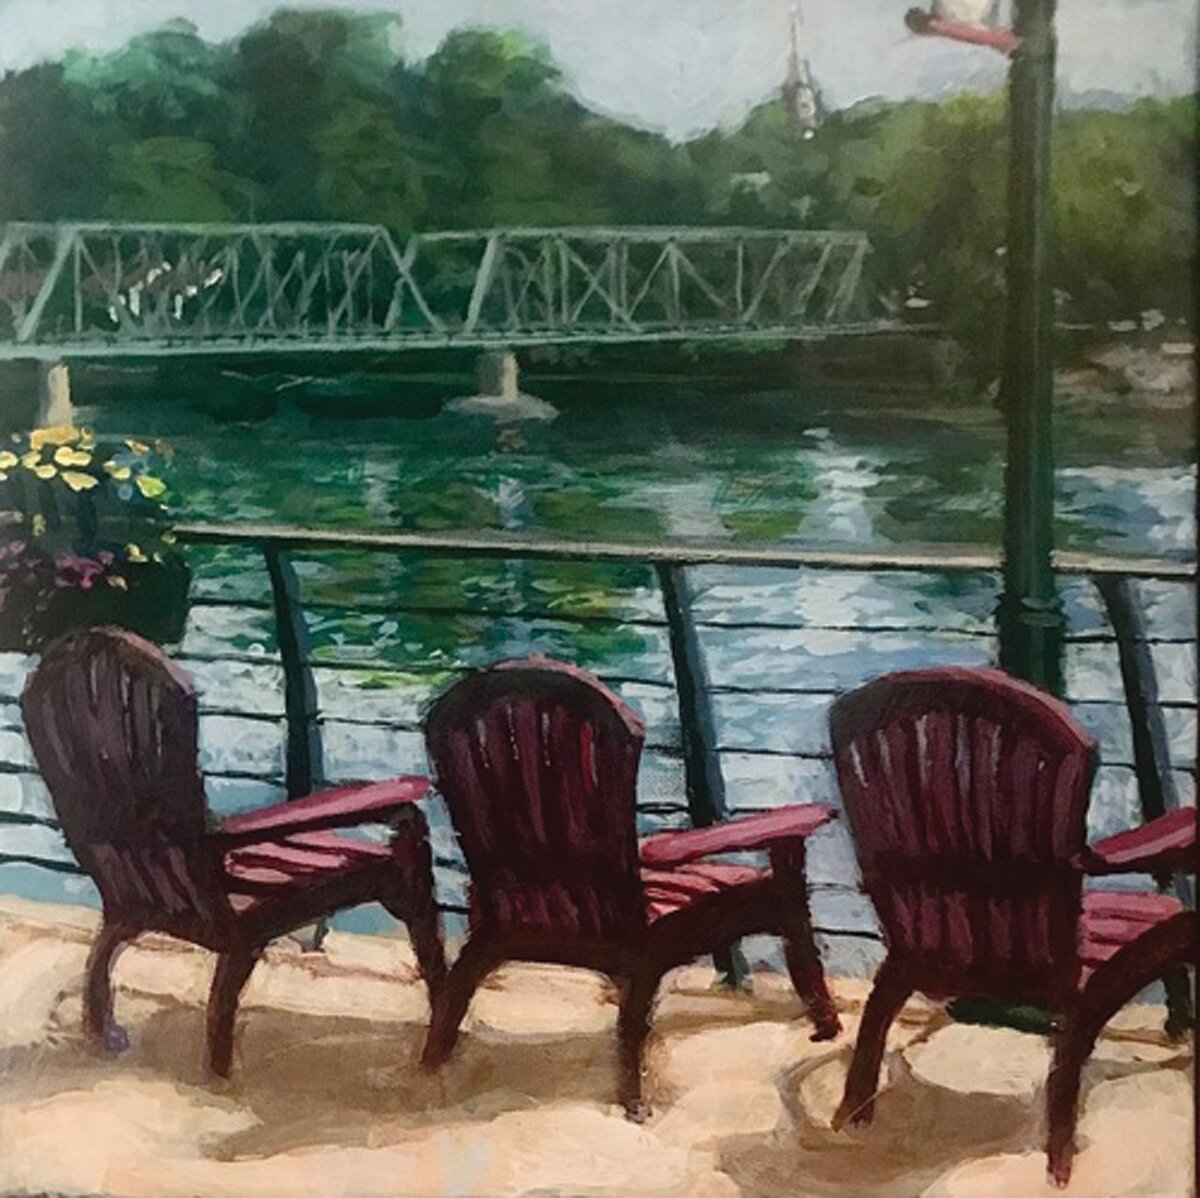 “Stella’s View of Lambertville” is an acrylic by Charles David Viera.